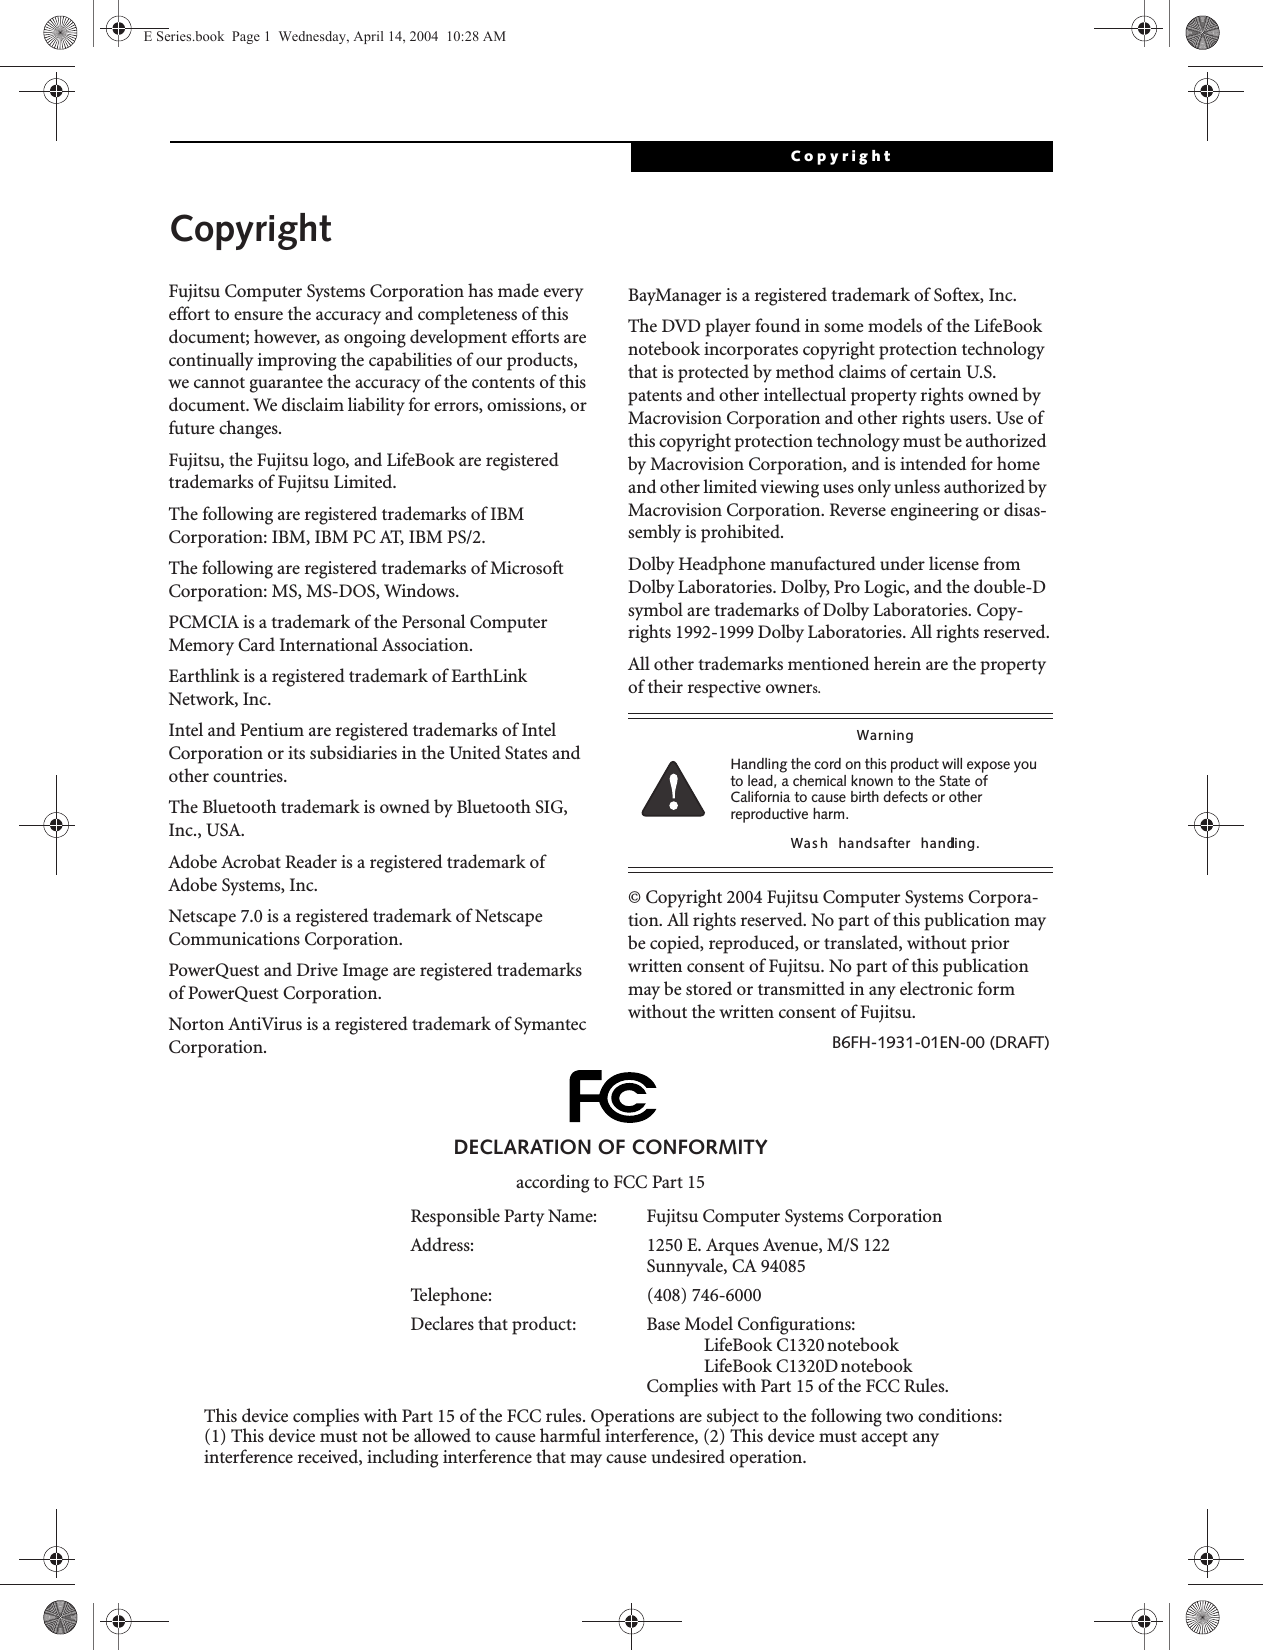 CopyrightCopyrightFujitsu Computer Systems Corporation has made every effort to ensure the accuracy and completeness of this document; however, as ongoing development efforts are continually improving the capabilities of our products, we cannot guarantee the accuracy of the contents of this document. We disclaim liability for errors, omissions, or future changes.Fujitsu, the Fujitsu logo, and LifeBook are registered trademarks of Fujitsu Limited.The following are registered trademarks of IBM Corporation: IBM, IBM PC AT, IBM PS/2. The following are registered trademarks of Microsoft Corporation: MS, MS-DOS, Windows.PCMCIA is a trademark of the Personal Computer Memory Card International Association.Earthlink is a registered trademark of EarthLink Network, Inc. Intel and Pentium are registered trademarks of Intel Corporation or its subsidiaries in the United States and other countries.The Bluetooth trademark is owned by Bluetooth SIG, Inc., USA.Adobe Acrobat Reader is a registered trademark of Adobe Systems, Inc.Netscape 7.0 is a registered trademark of Netscape Communications Corporation.PowerQuest and Drive Image are registered trademarks of PowerQuest Corporation.Norton AntiVirus is a registered trademark of Symantec Corporation.BayManager is a registered trademark of Softex, Inc.The DVD player found in some models of the LifeBook notebook incorporates copyright protection technology that is protected by method claims of certain U.S. patents and other intellectual property rights owned by Macrovision Corporation and other rights users. Use of this copyright protection technology must be authorized by Macrovision Corporation, and is intended for home and other limited viewing uses only unless authorized by Macrovision Corporation. Reverse engineering or disas-sembly is prohibited.Dolby Headphone manufactured under license from Dolby Laboratories. Dolby, Pro Logic, and the double-D symbol are trademarks of Dolby Laboratories. Copy-rights 1992-1999 Dolby Laboratories. All rights reserved.All other trademarks mentioned herein are the property of their respective owners.© Copyright 2004 Fujitsu Computer Systems Corpora-tion. All rights reserved. No part of this publication may be copied, reproduced, or translated, without prior written consent of Fujitsu. No part of this publication may be stored or transmitted in any electronic form without the written consent of Fujitsu.B6FH-1931-01EN-00 (DRAFT)WarningHandling the cord on this product will expose you to lead, a chemical known to the State of California to cause birth defects or other reproductive harm. Was h  hands  after  handling.DECLARATION OF CONFORMITYaccording to FCC Part 15Responsible Party Name: Fujitsu Computer Systems CorporationAddress:  1250 E. Arques Avenue, M/S 122Sunnyvale, CA 94085Telephone: (408) 746-6000Declares that product: Base Model Configurations:LifeBook C1320 notebookLifeBook C1320D notebookComplies with Part 15 of the FCC Rules.This device complies with Part 15 of the FCC rules. Operations are subject to the following two conditions:(1) This device must not be allowed to cause harmful interference, (2) This device must accept anyinterference received, including interference that may cause undesired operation.E Series.book  Page 1  Wednesday, April 14, 2004  10:28 AM